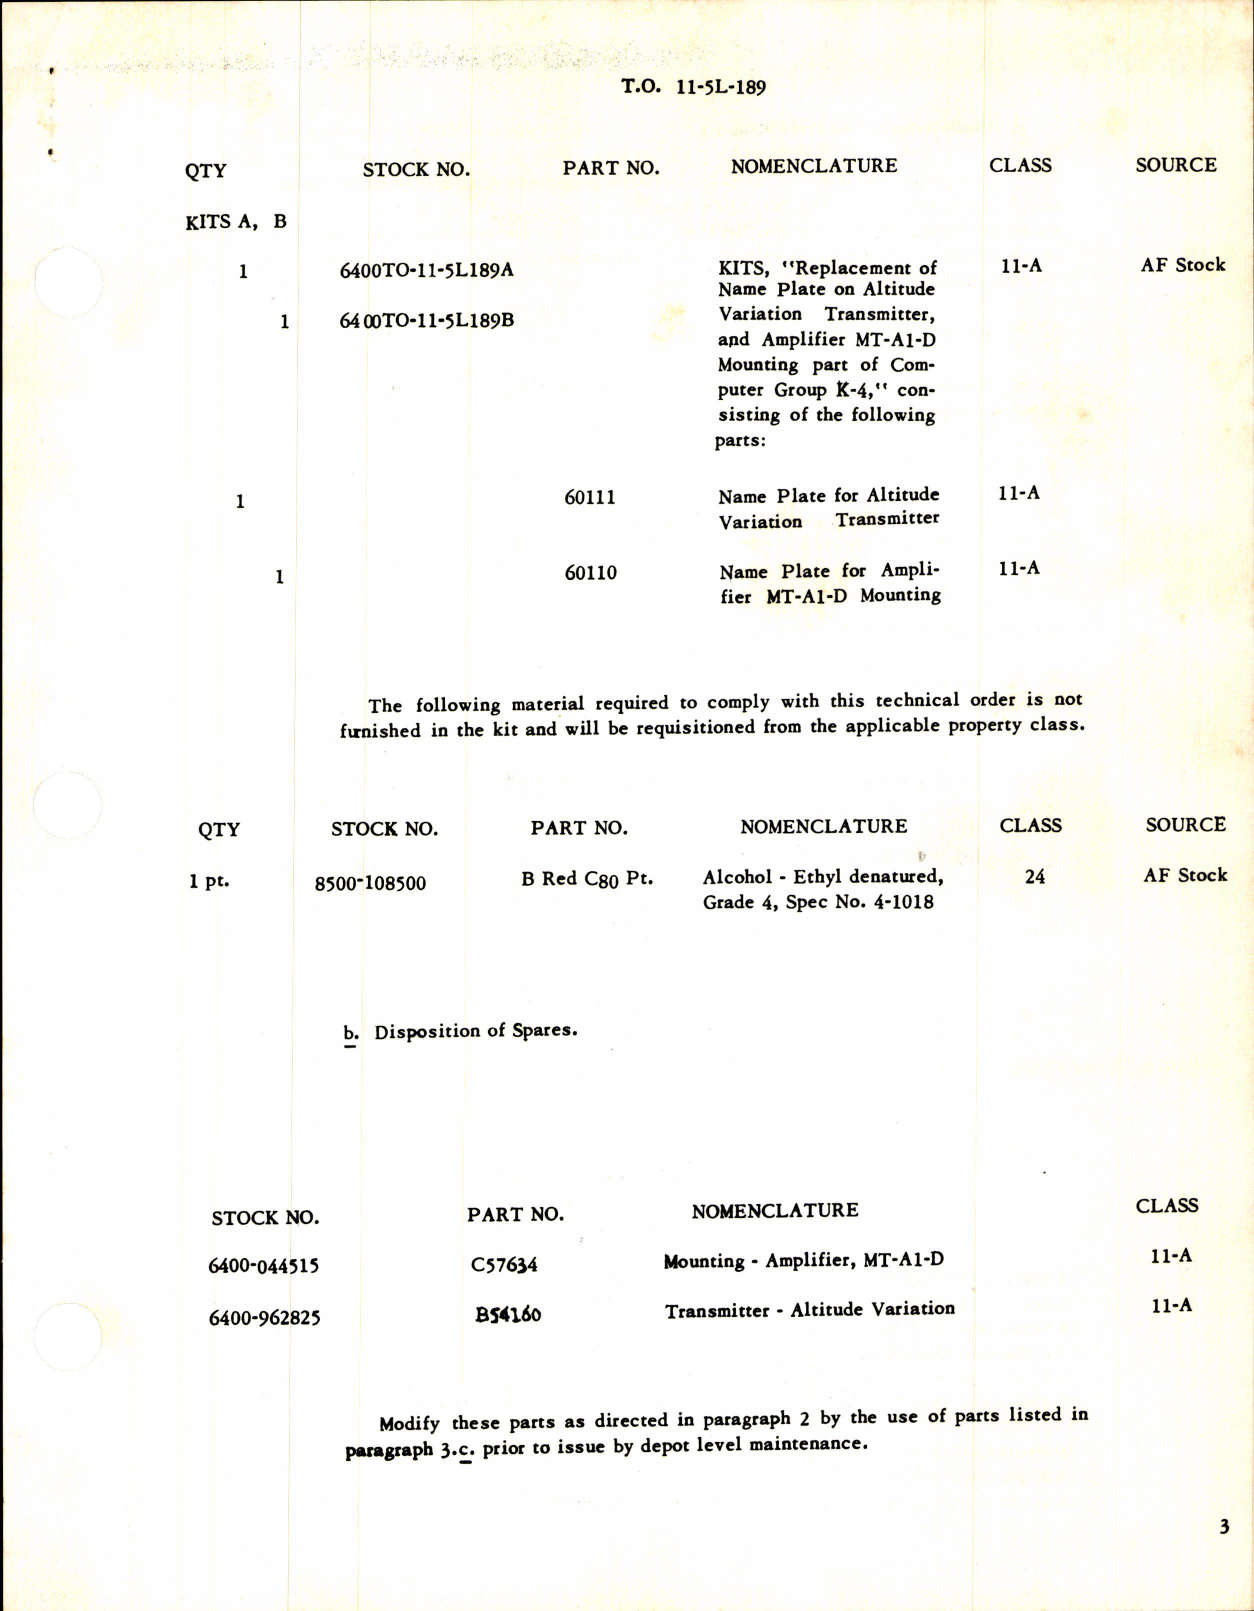 Sample page 3 from AirCorps Library document: Replacement of Name Plate on Altitude Transmitter